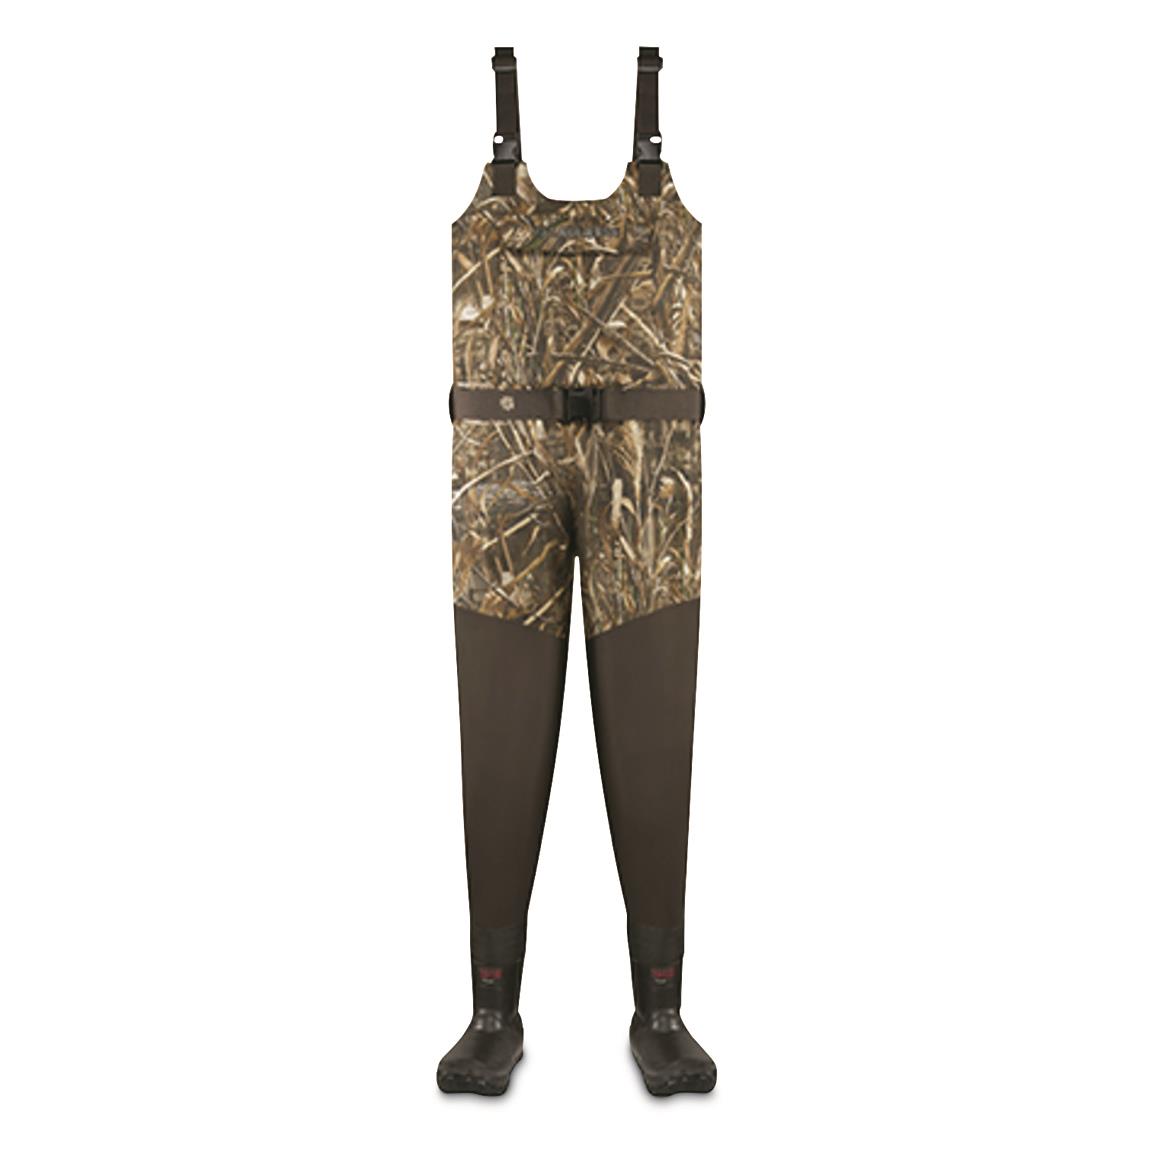 LaCrosse Wetlands Breathable Insulated Bootfoot Waders, 1,600-gram, Realtree MAX-5®